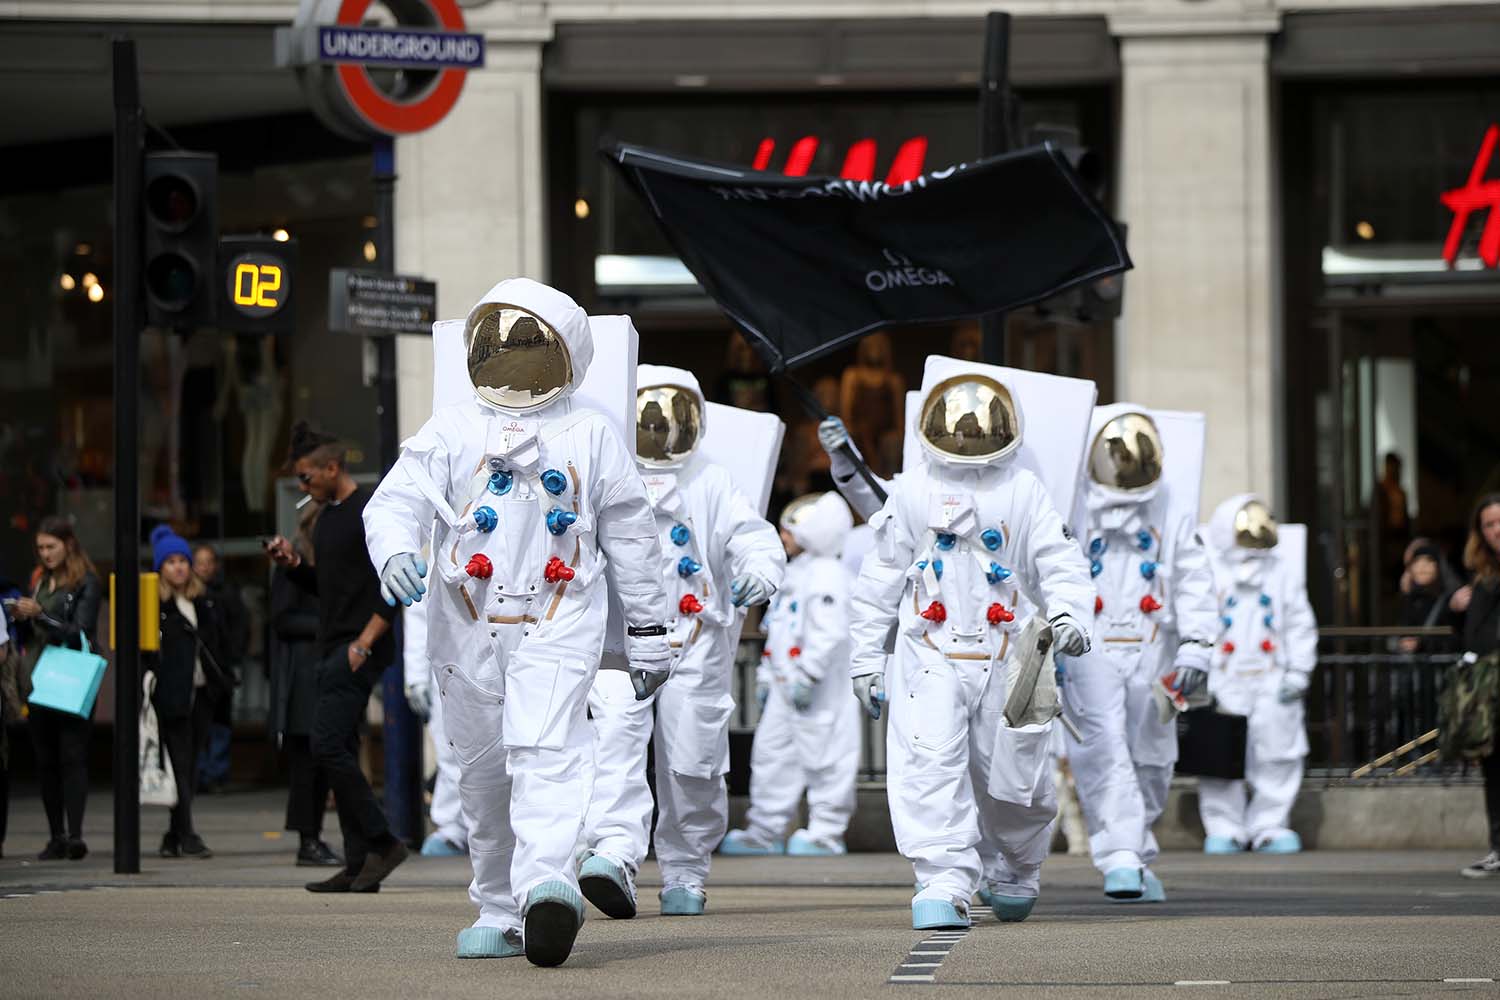 Astronauts on the loose in London